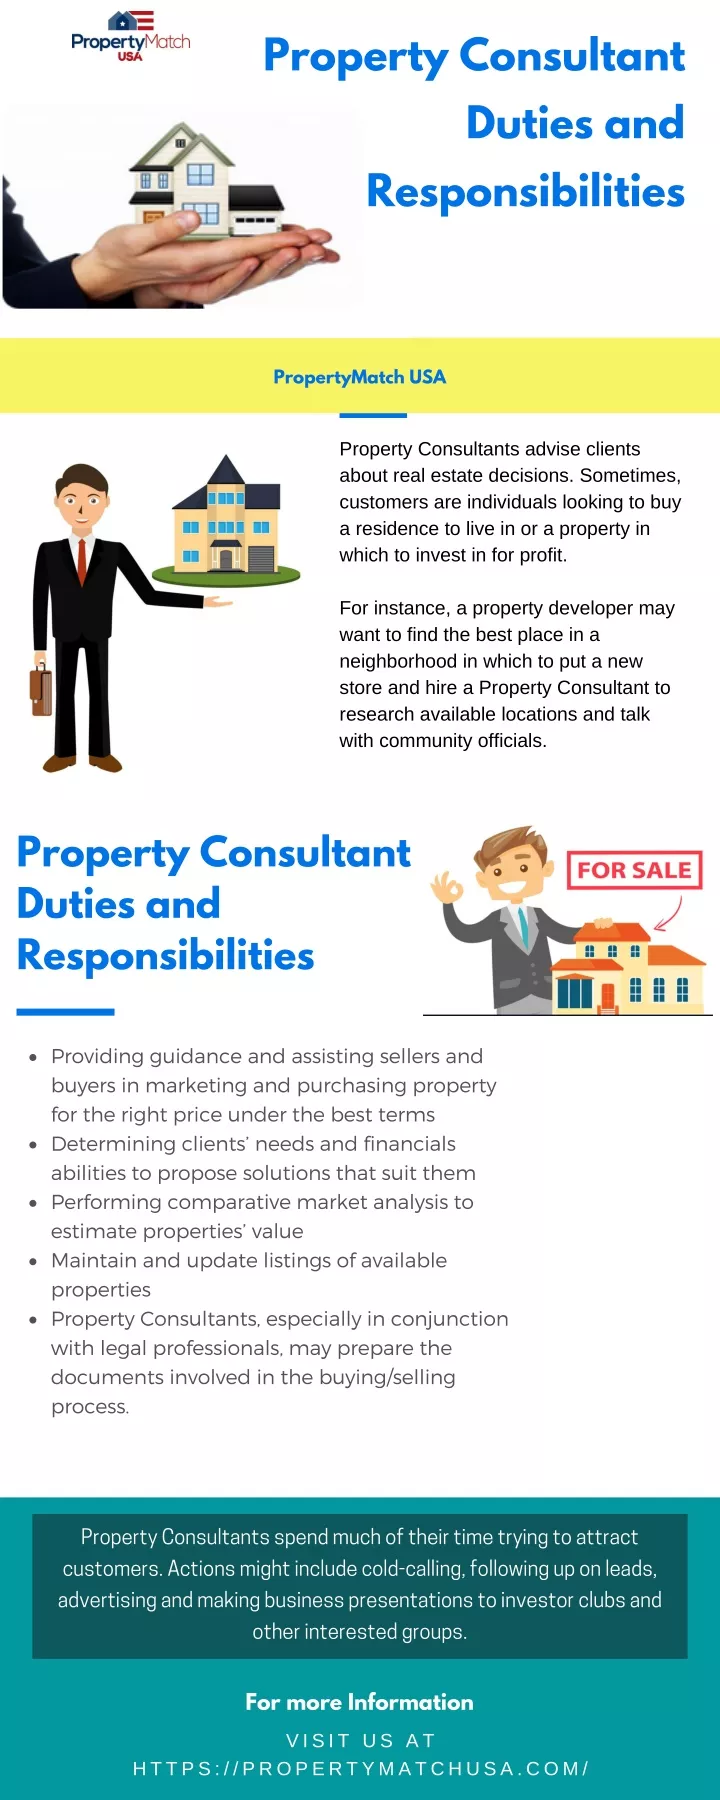 property consultant duties and responsibilities